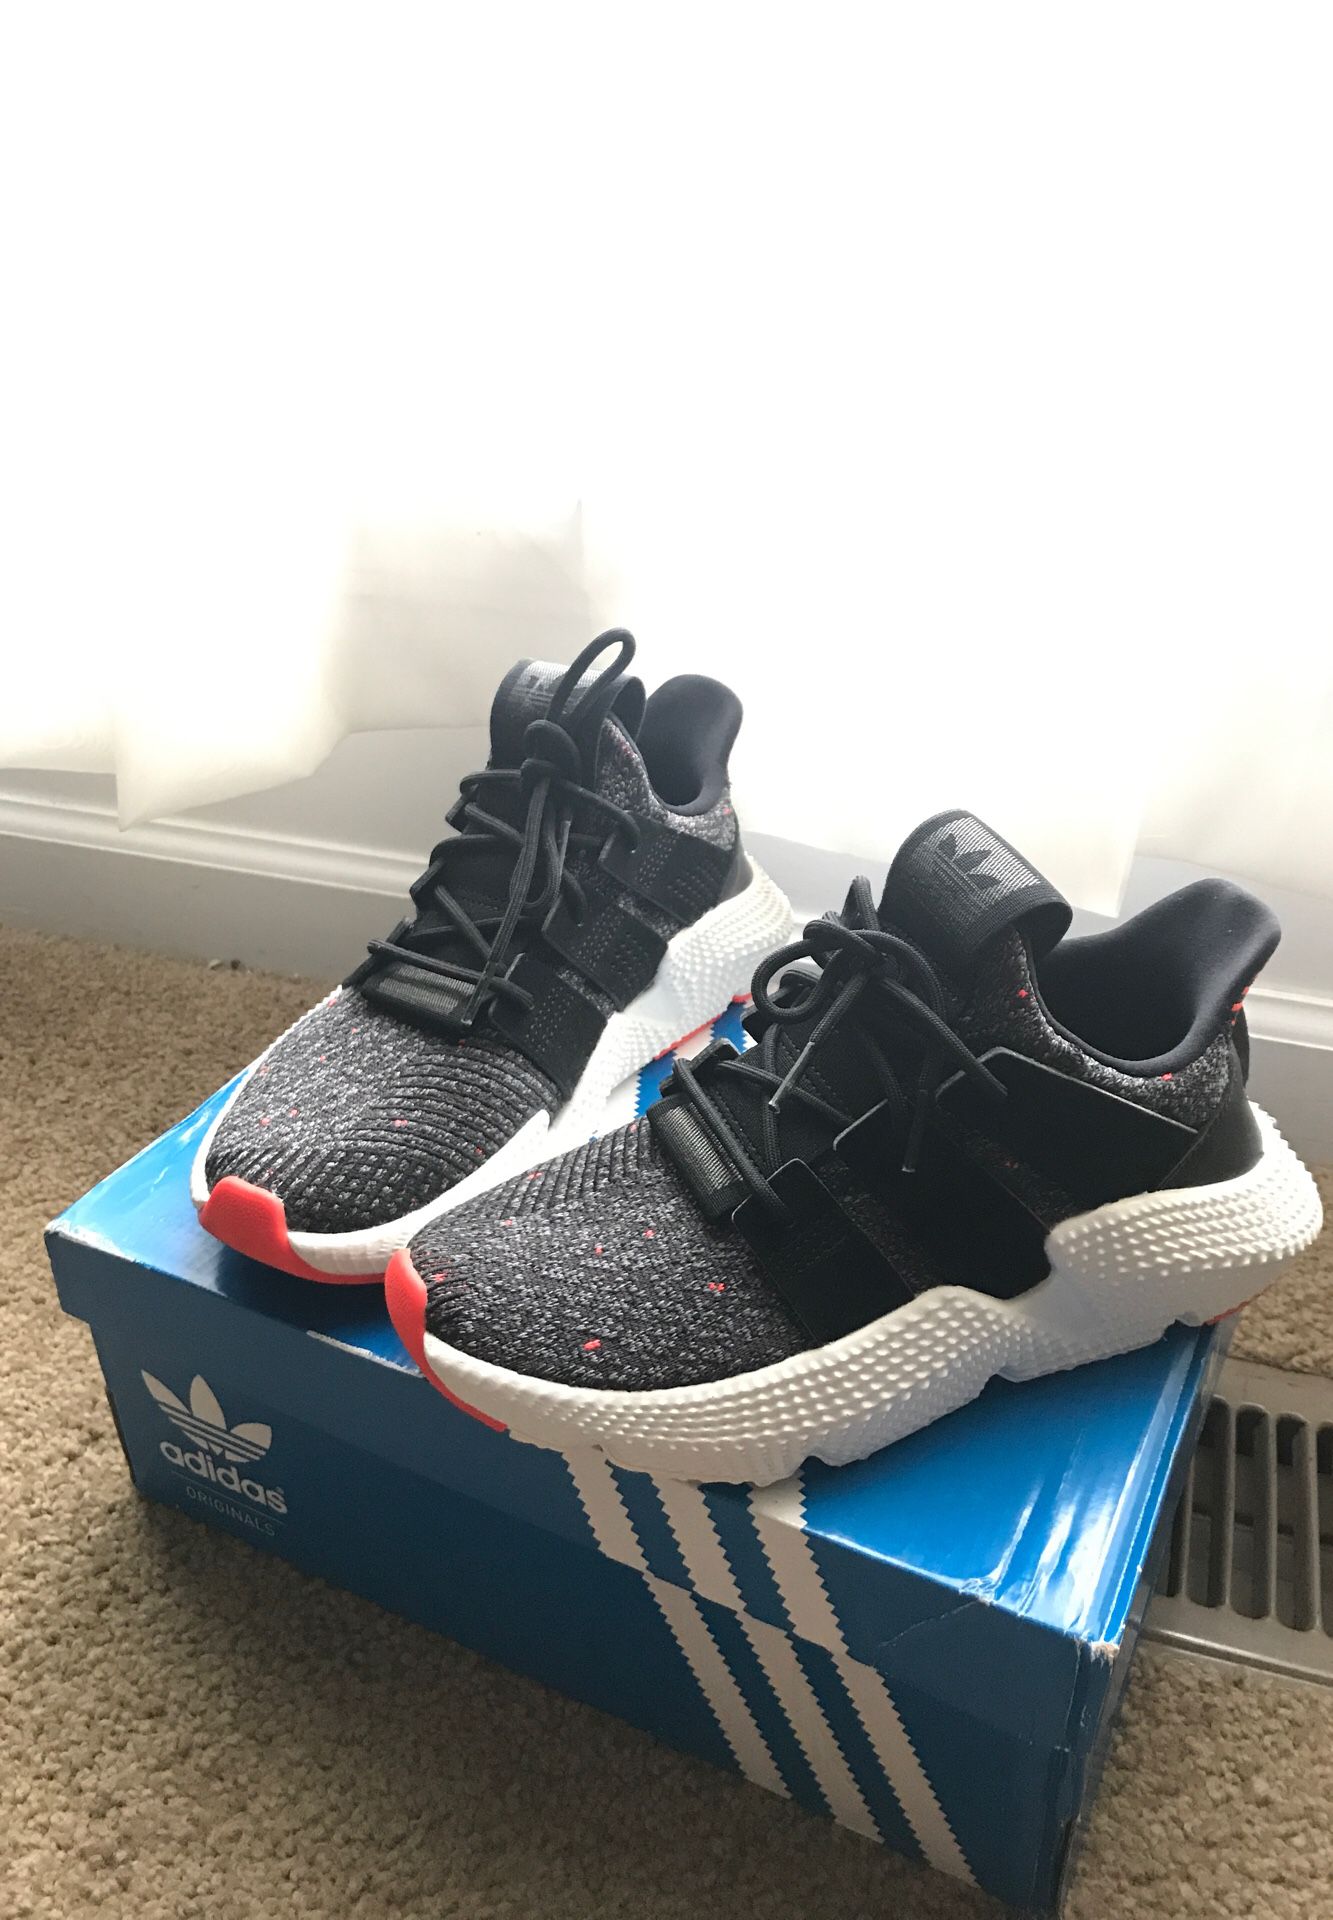 Adidas Prophere size 6 women’s